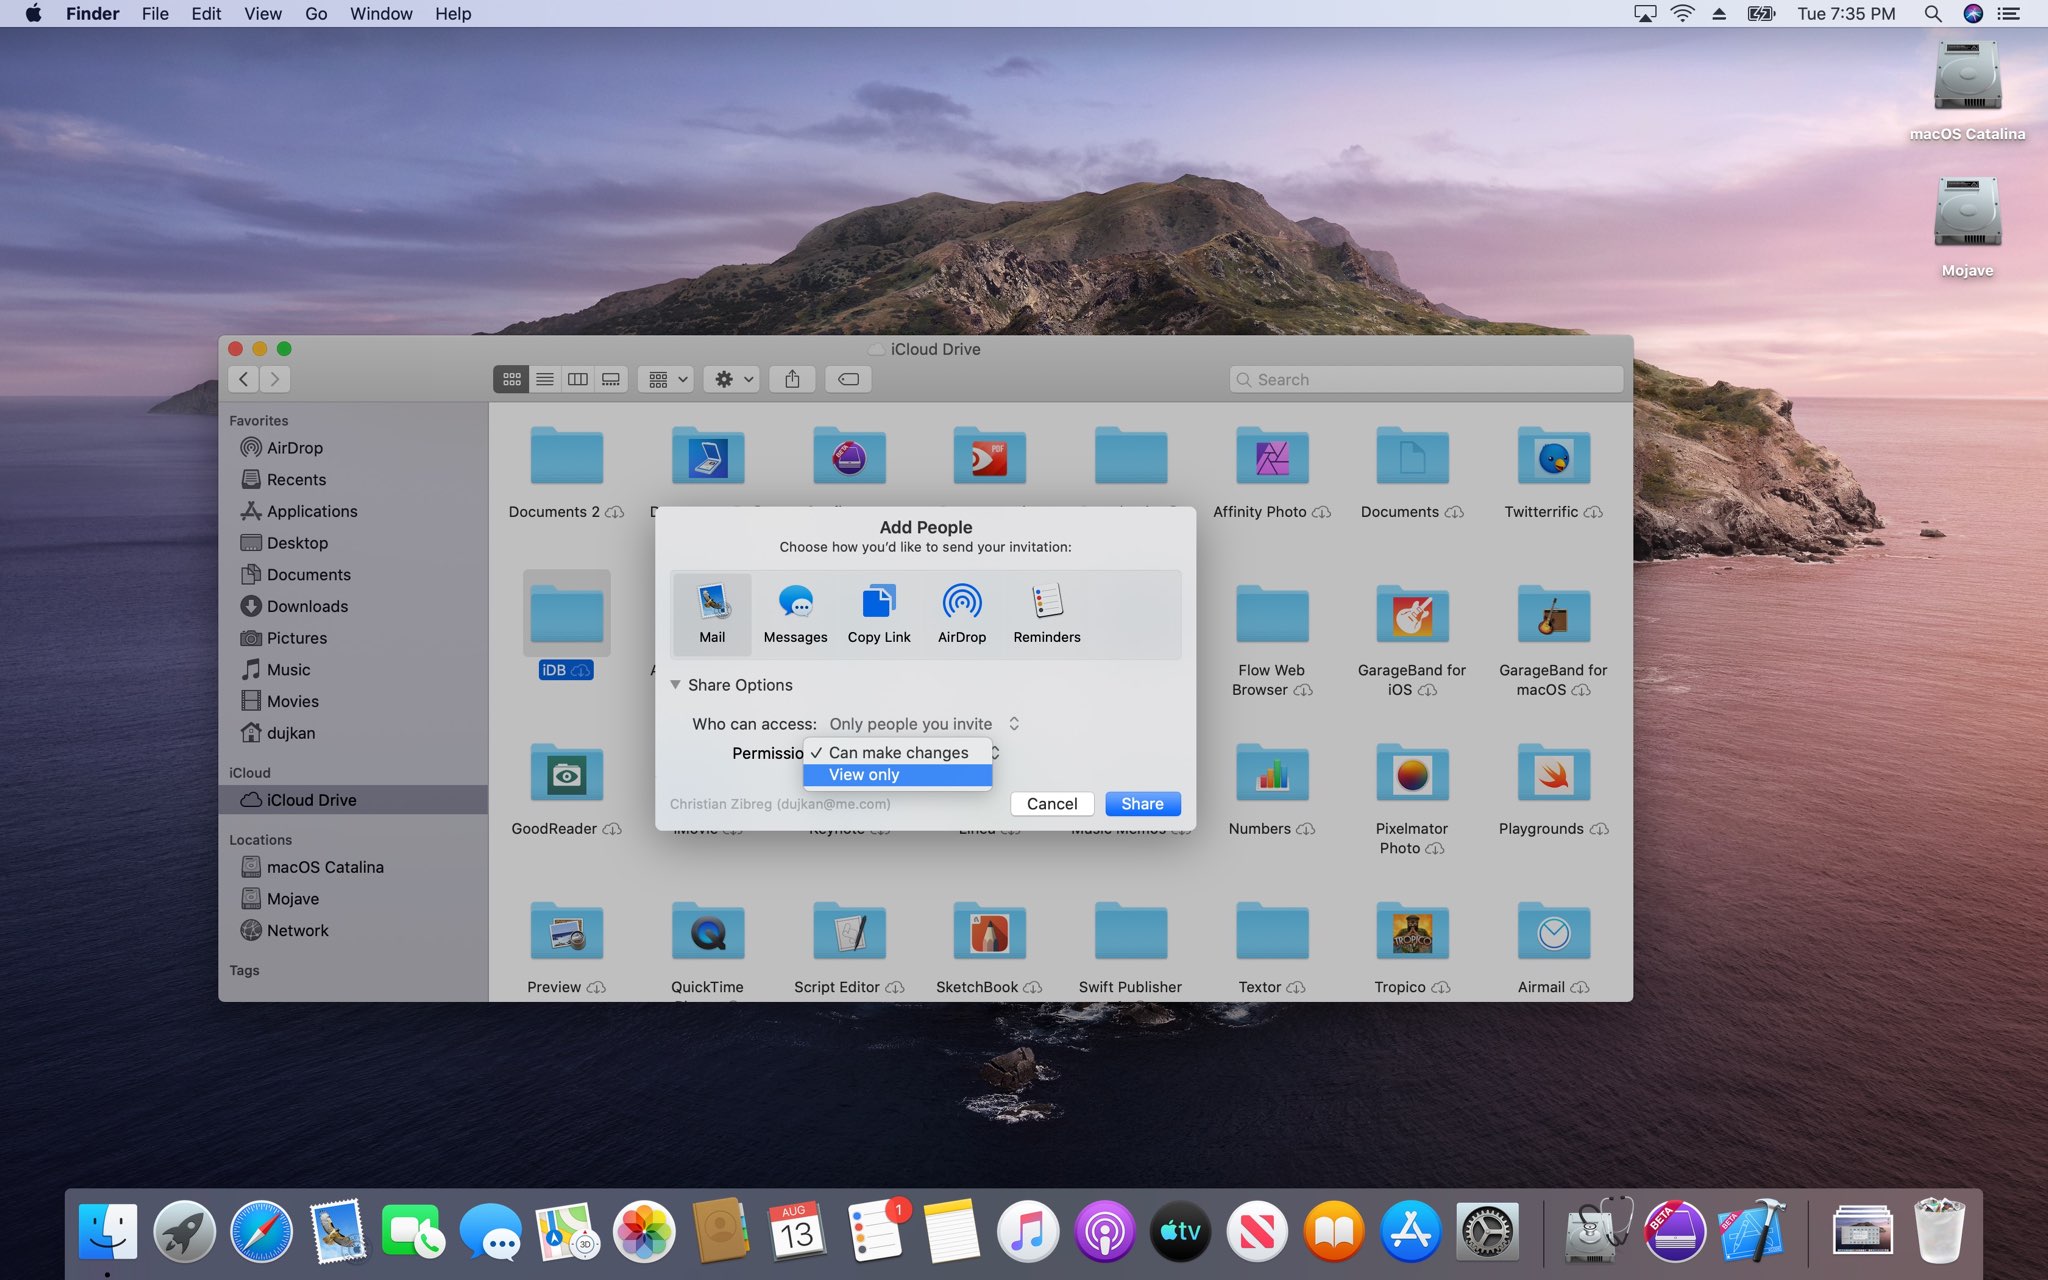 Icons For Mac Os Catalina Don Wnload And Application Folders